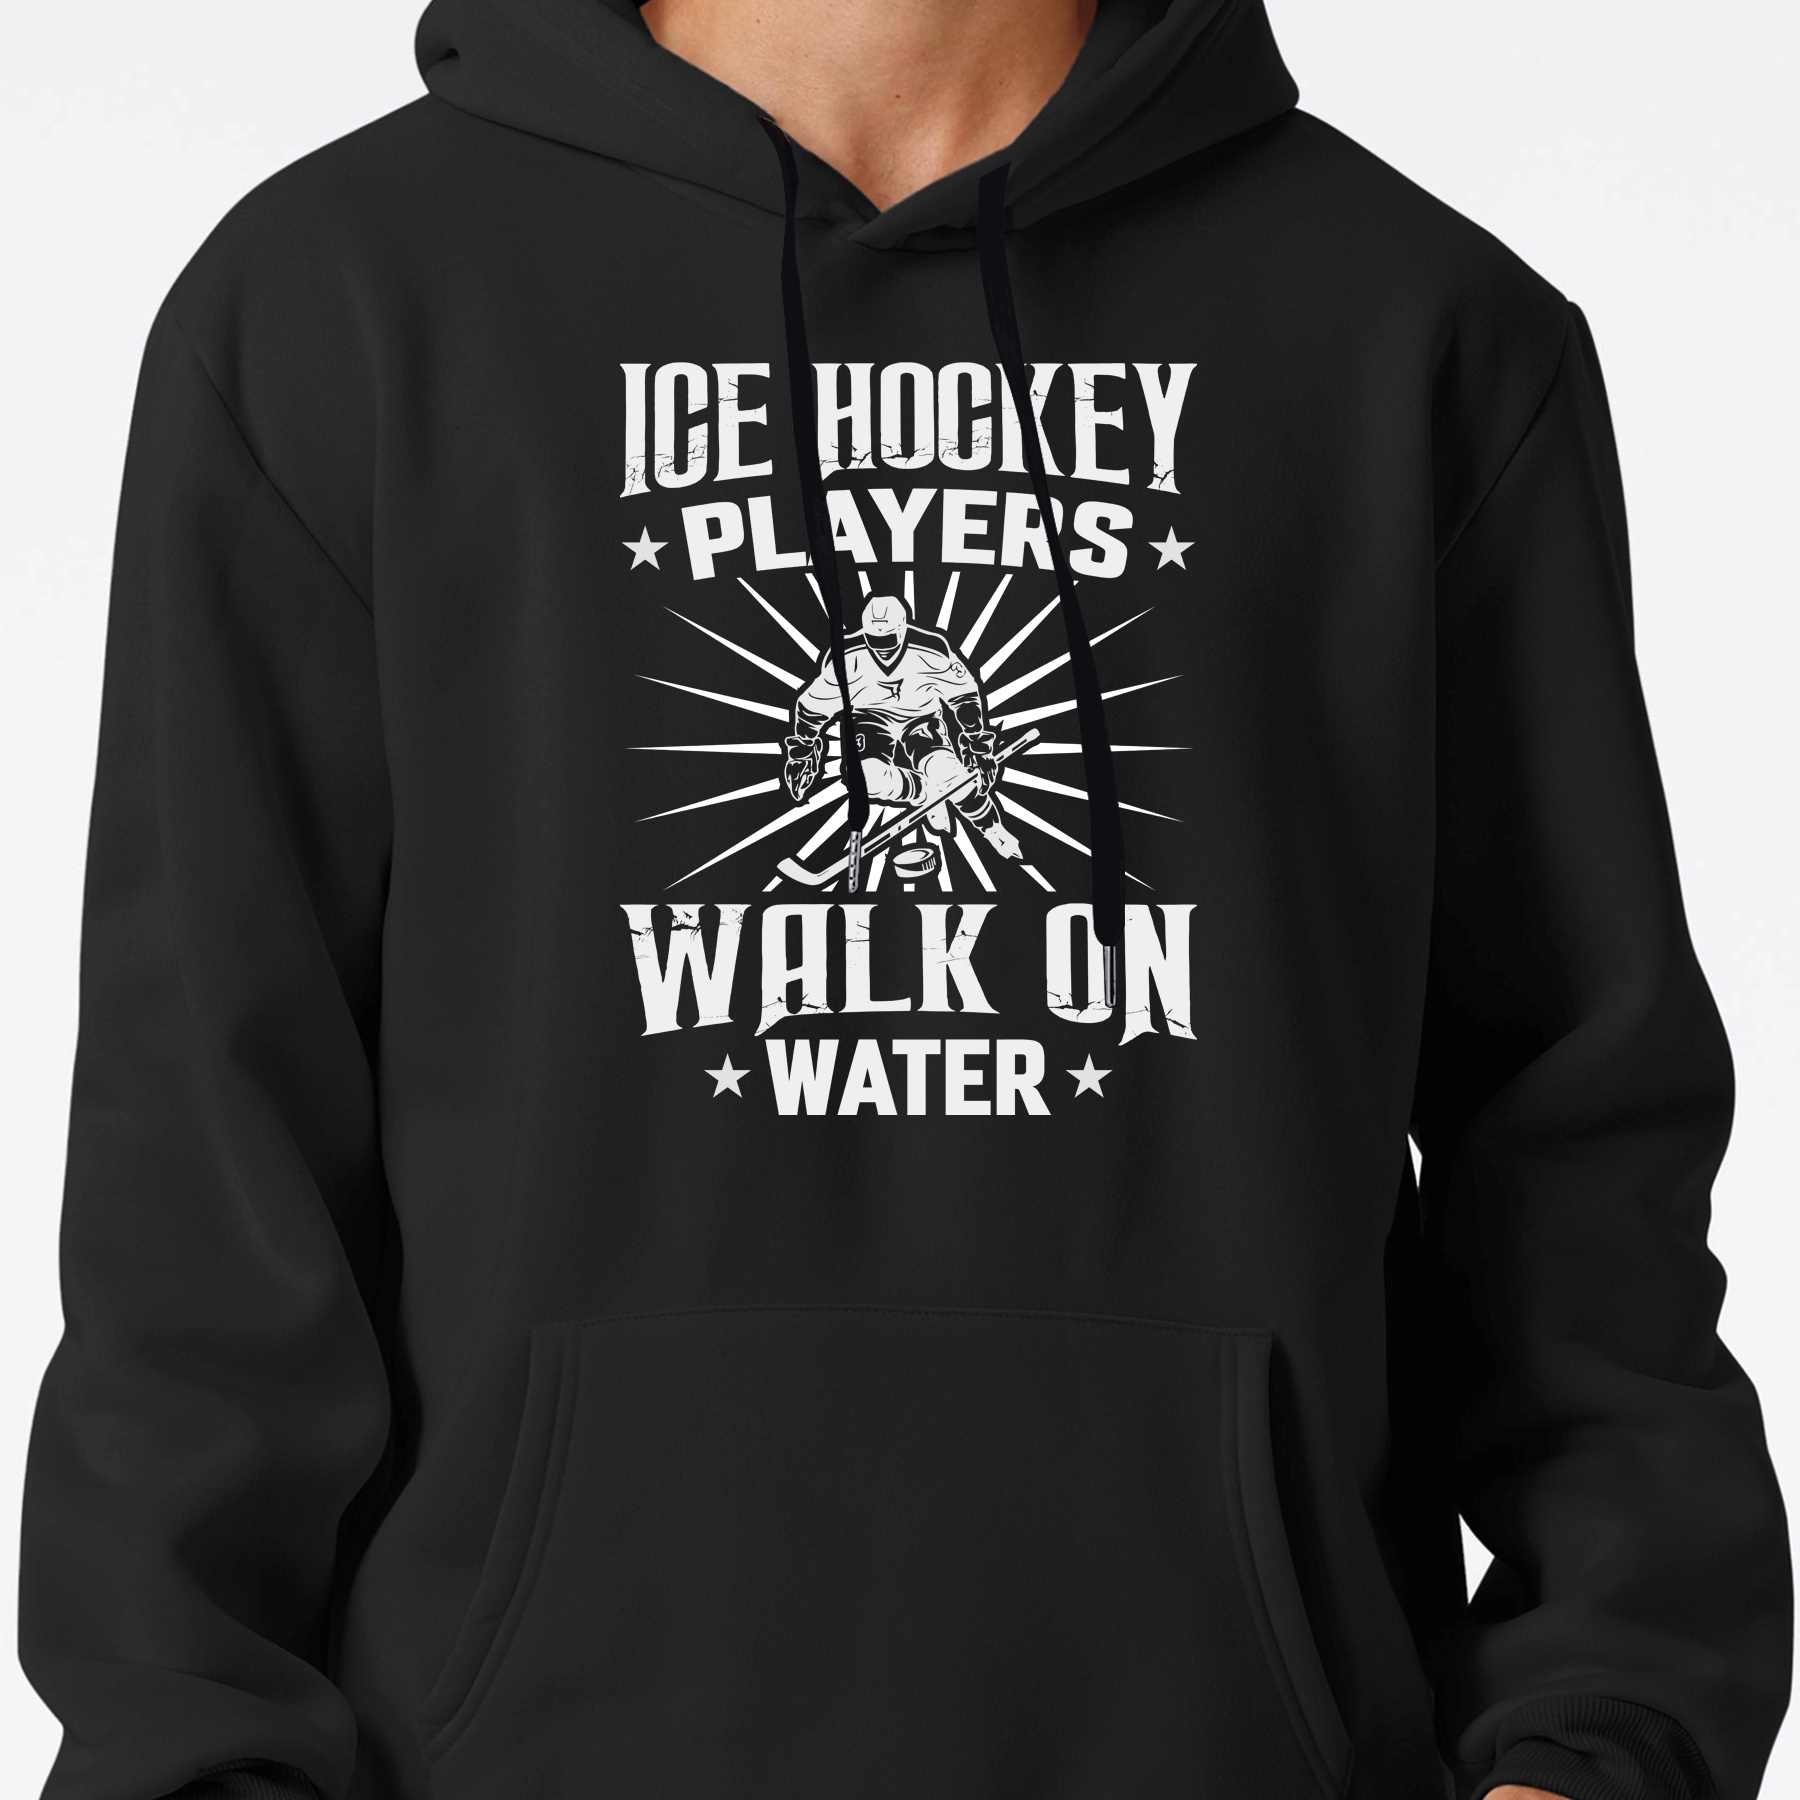 

Ice Hockey Player Graphic Print Sweatshirt, Artistic Graphic Design Hoodies With Fleece For Men, Men's Warm Slightly Flex Hooded Streetwear Pullover, For Fall And Winter, As Gifts